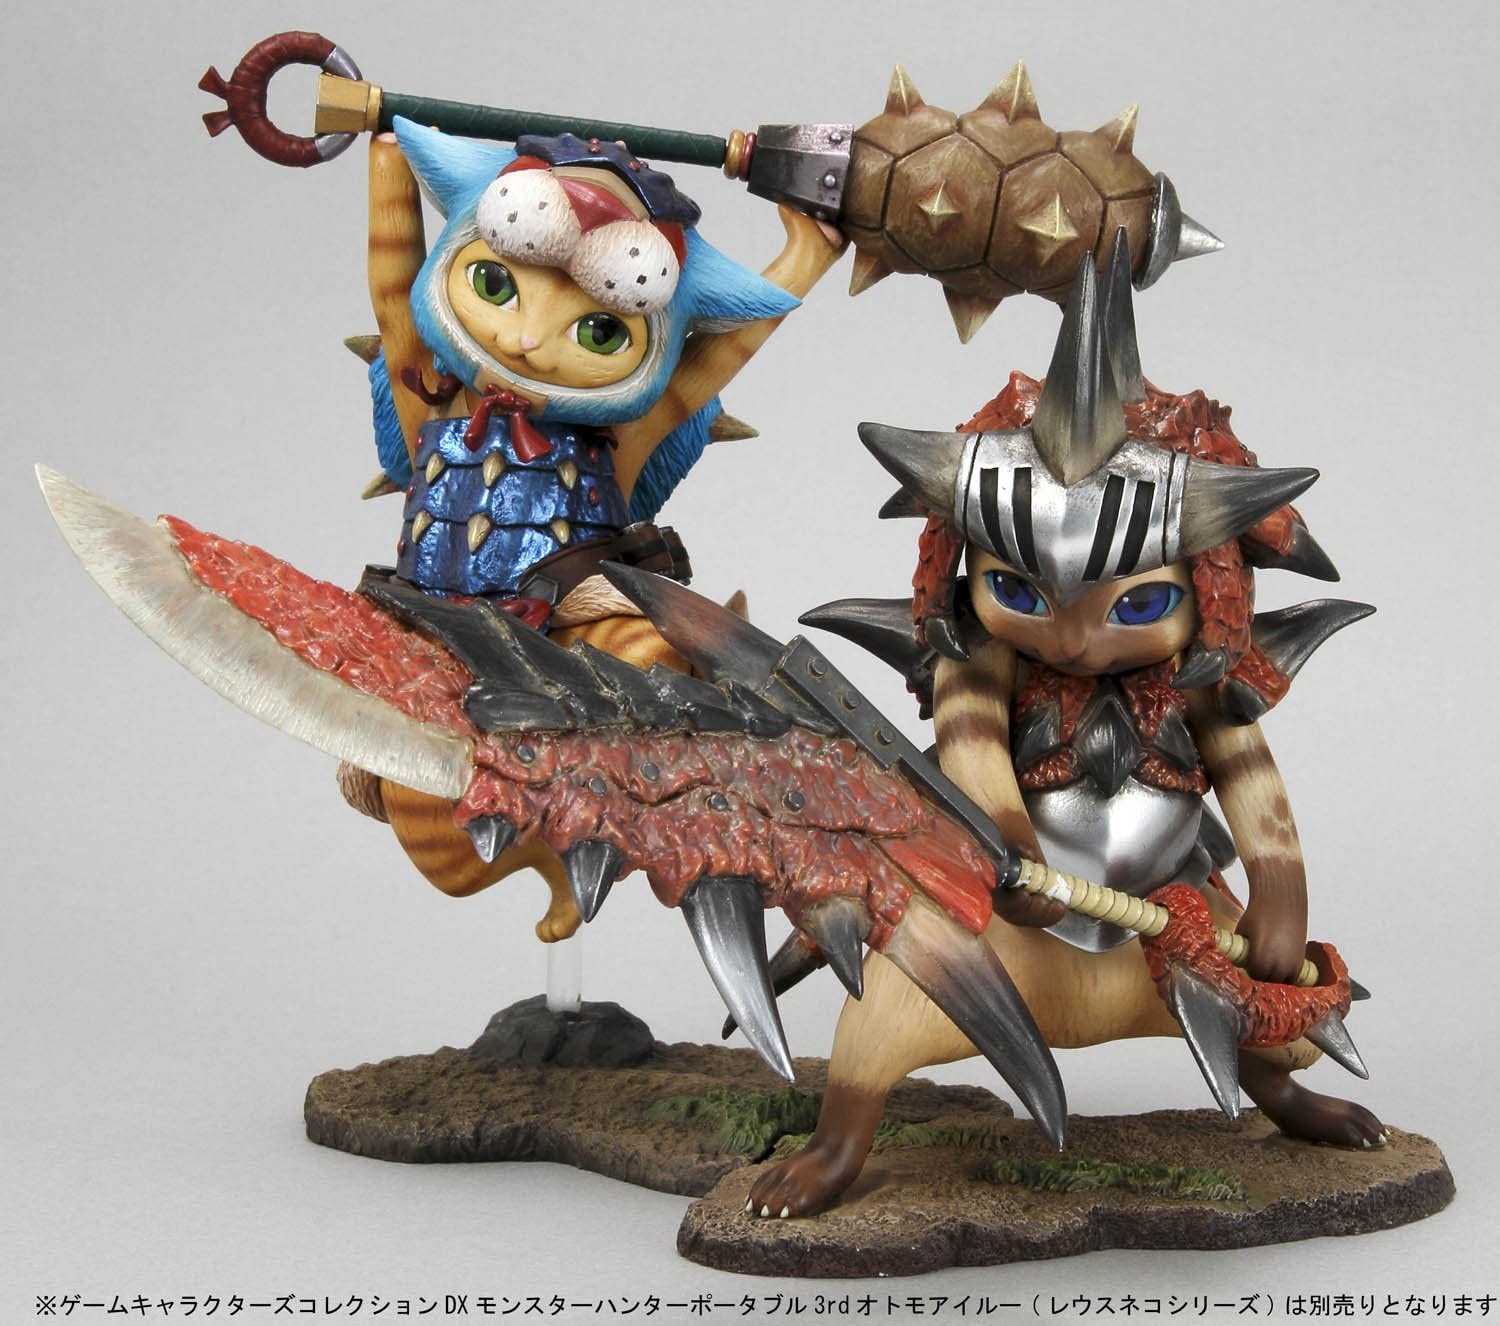 Game Characters Collection DX - Palico (F Arzuros Palico Armor) From "Monster Hunter Portable 3rd" | animota